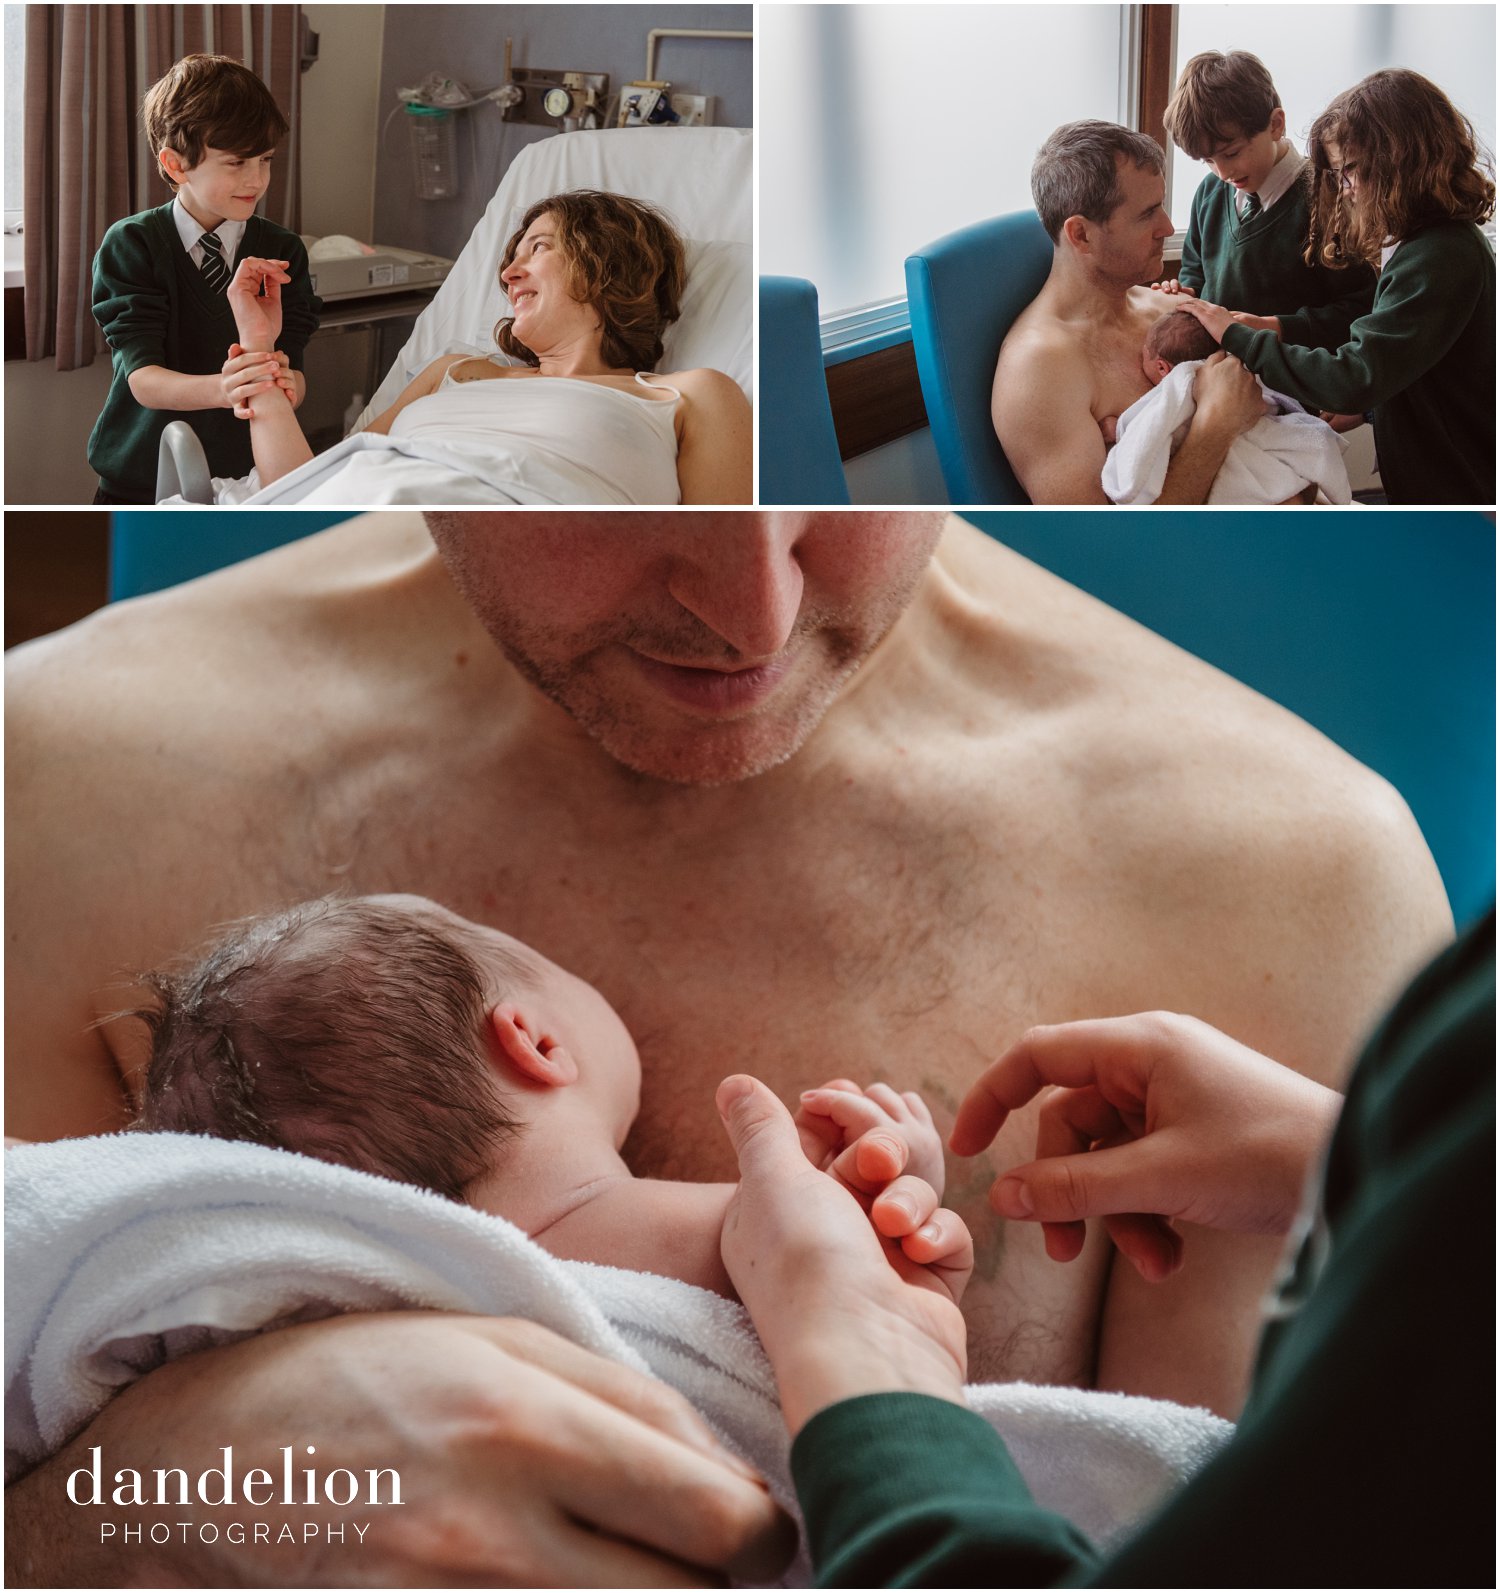 professional family photography capturing birth